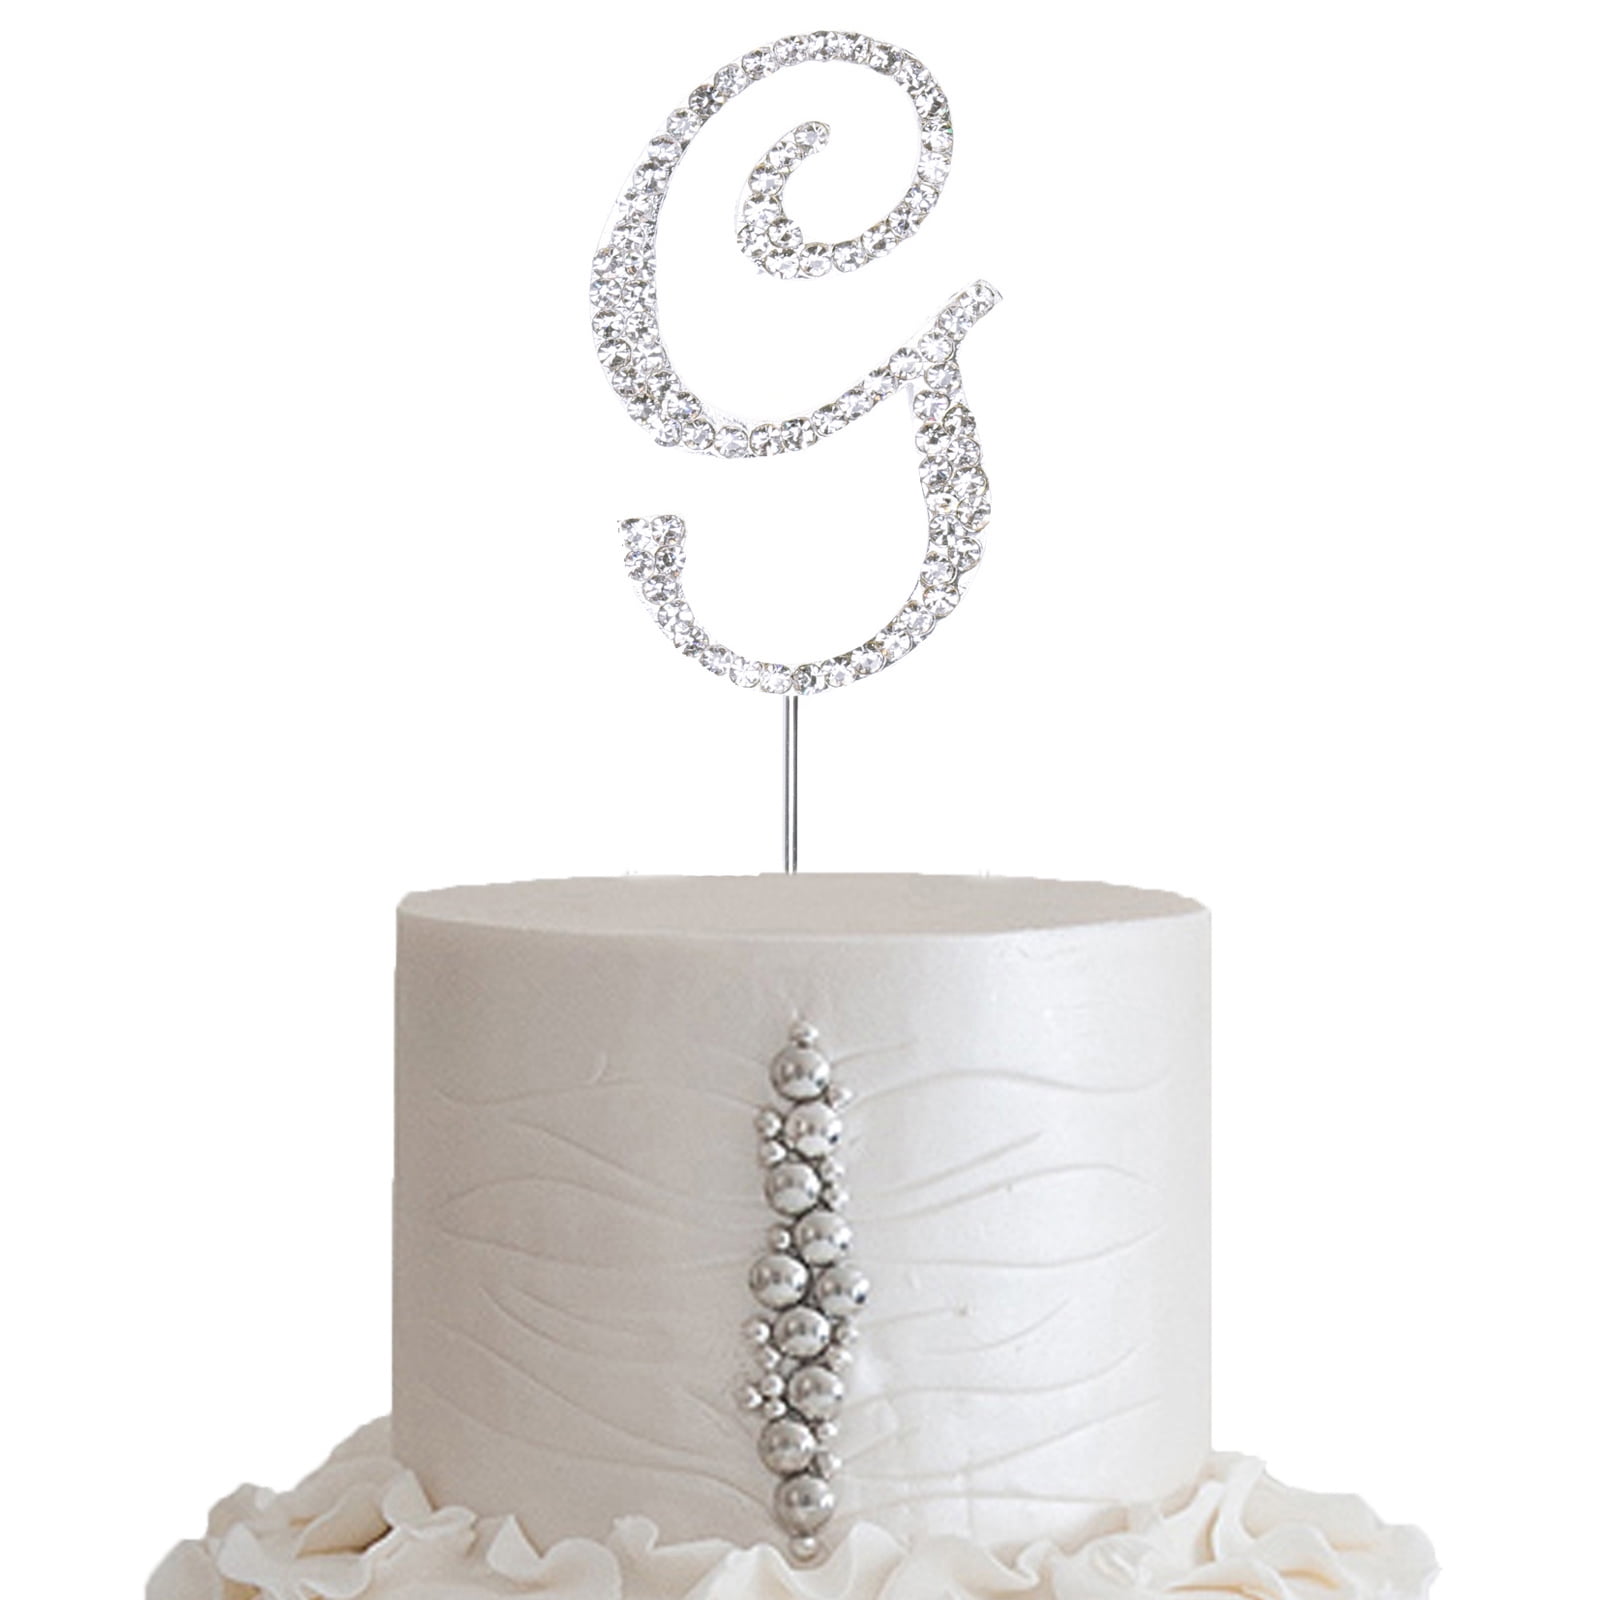 4.5" SILVER Letter S Rhinestone Cake Topper Wedding Party Decorations SALE 